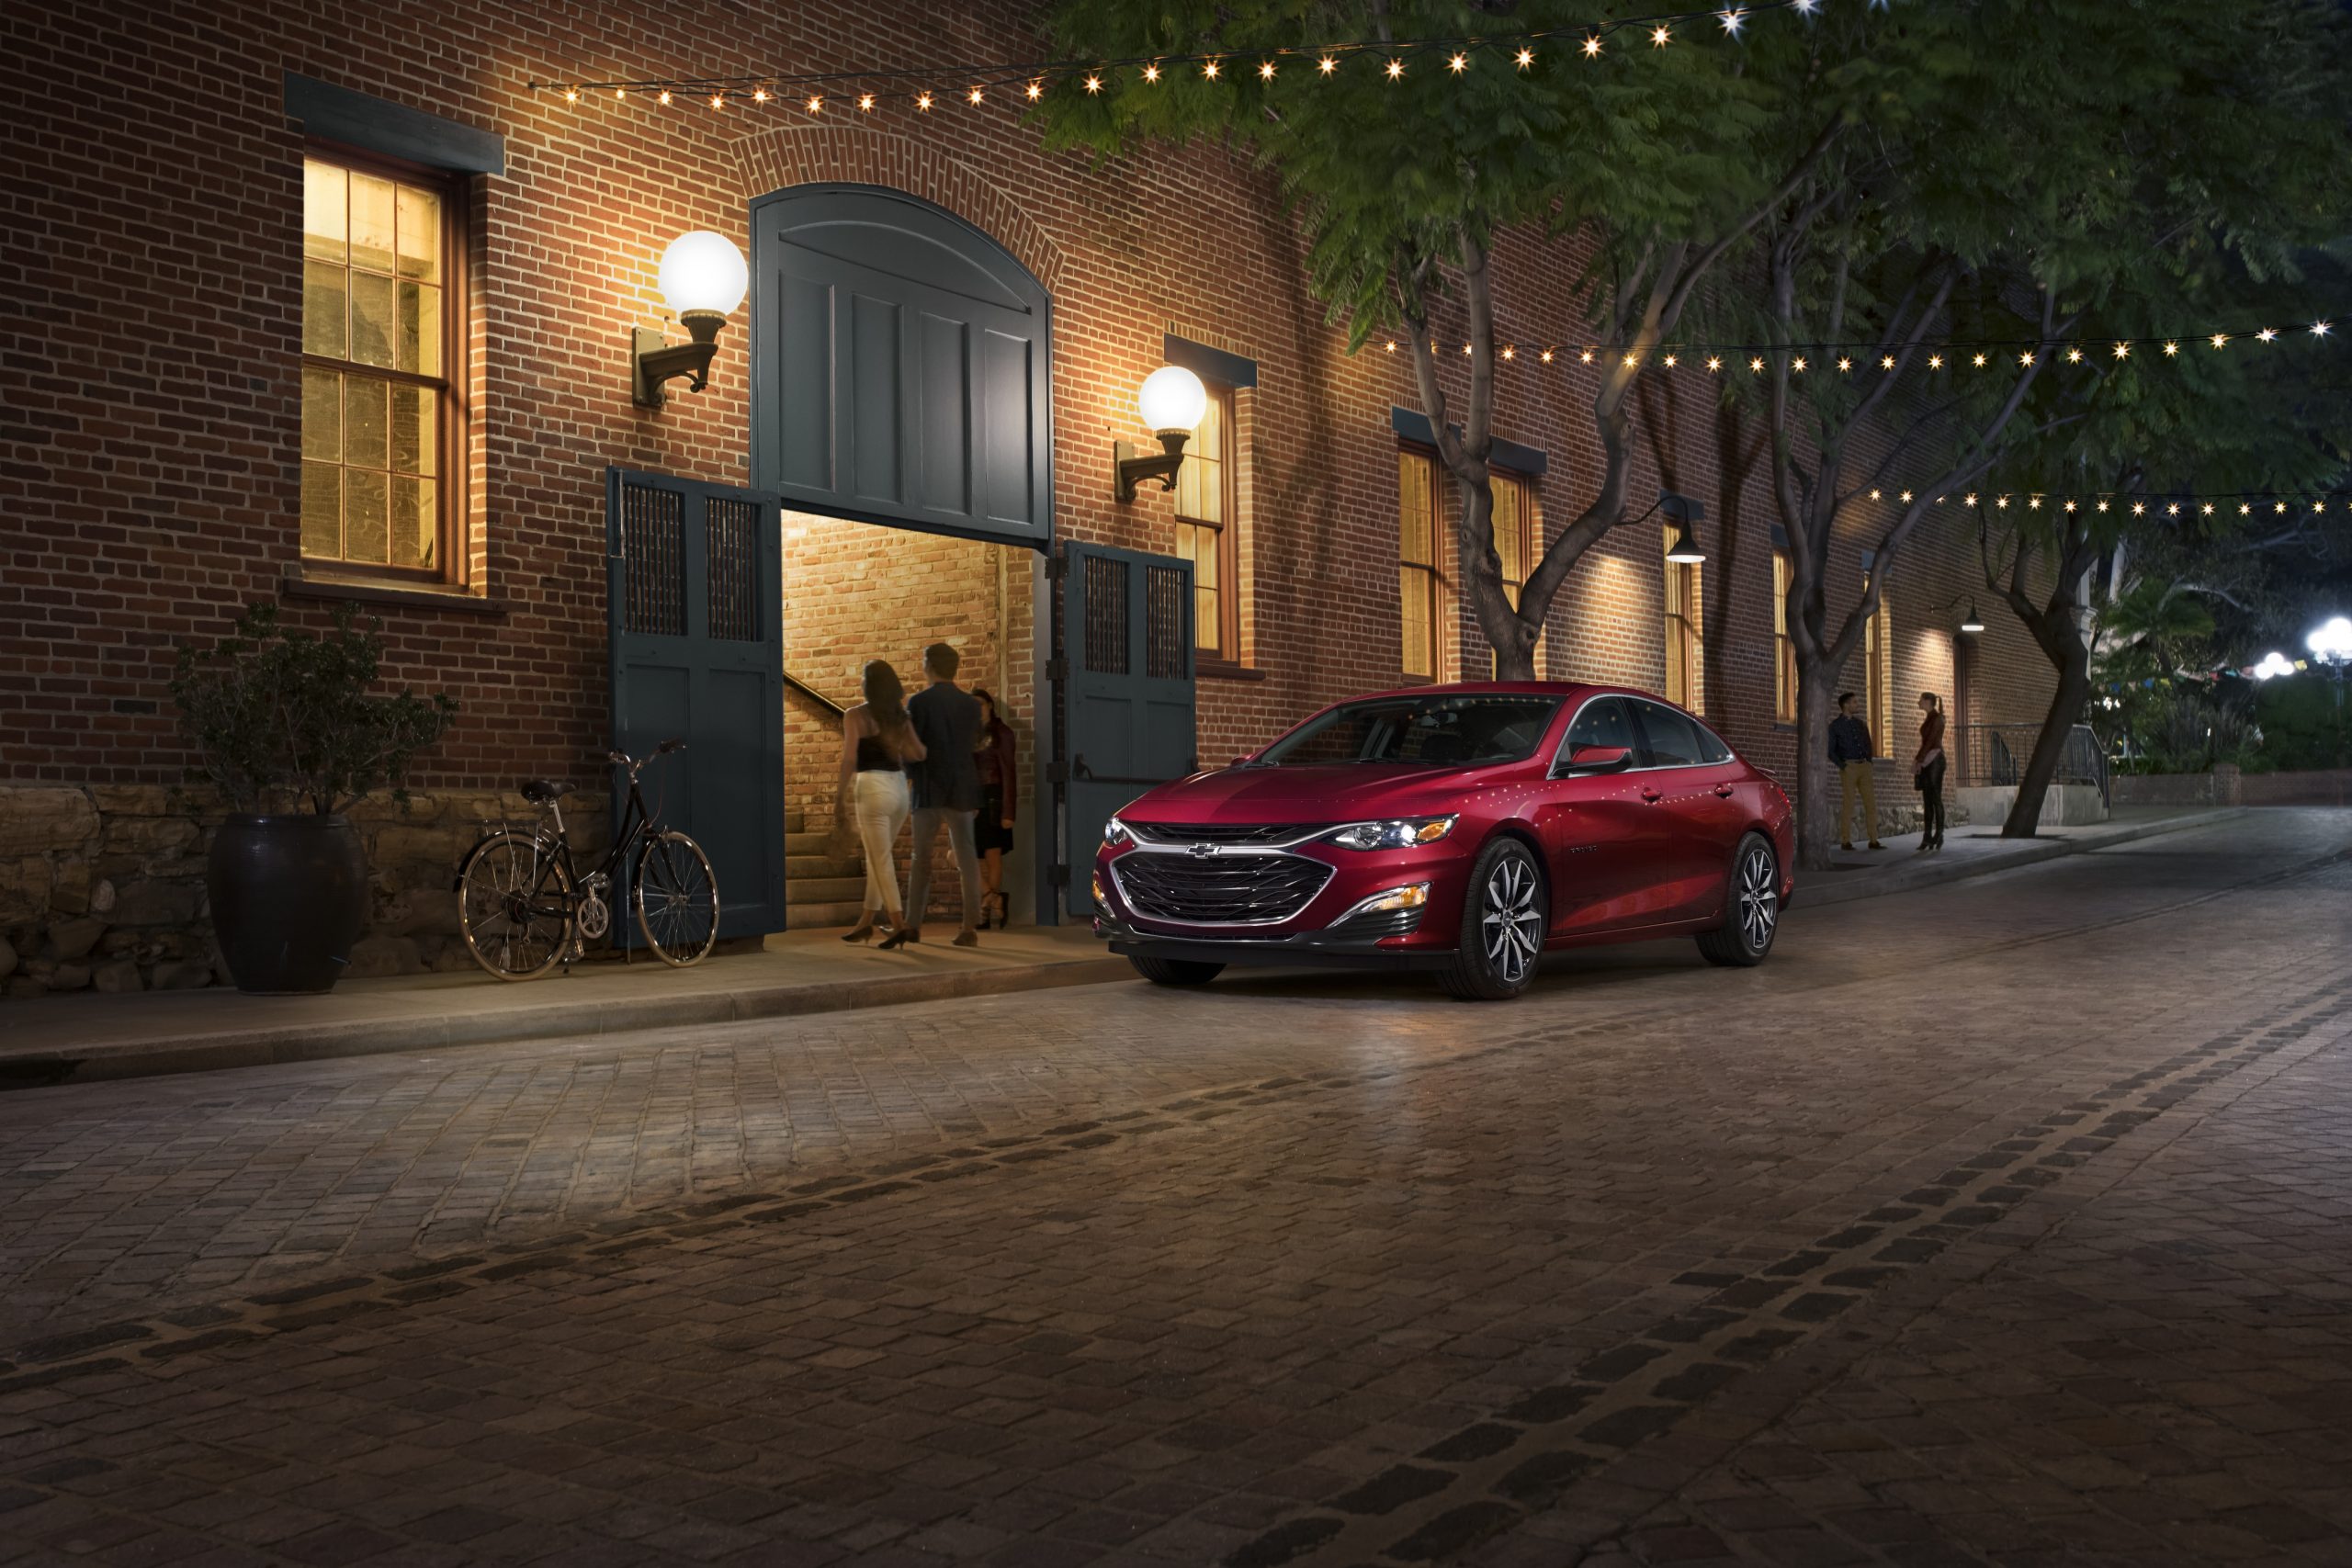 A red 2021 Chevy Malibu on display next to a building with lights on it